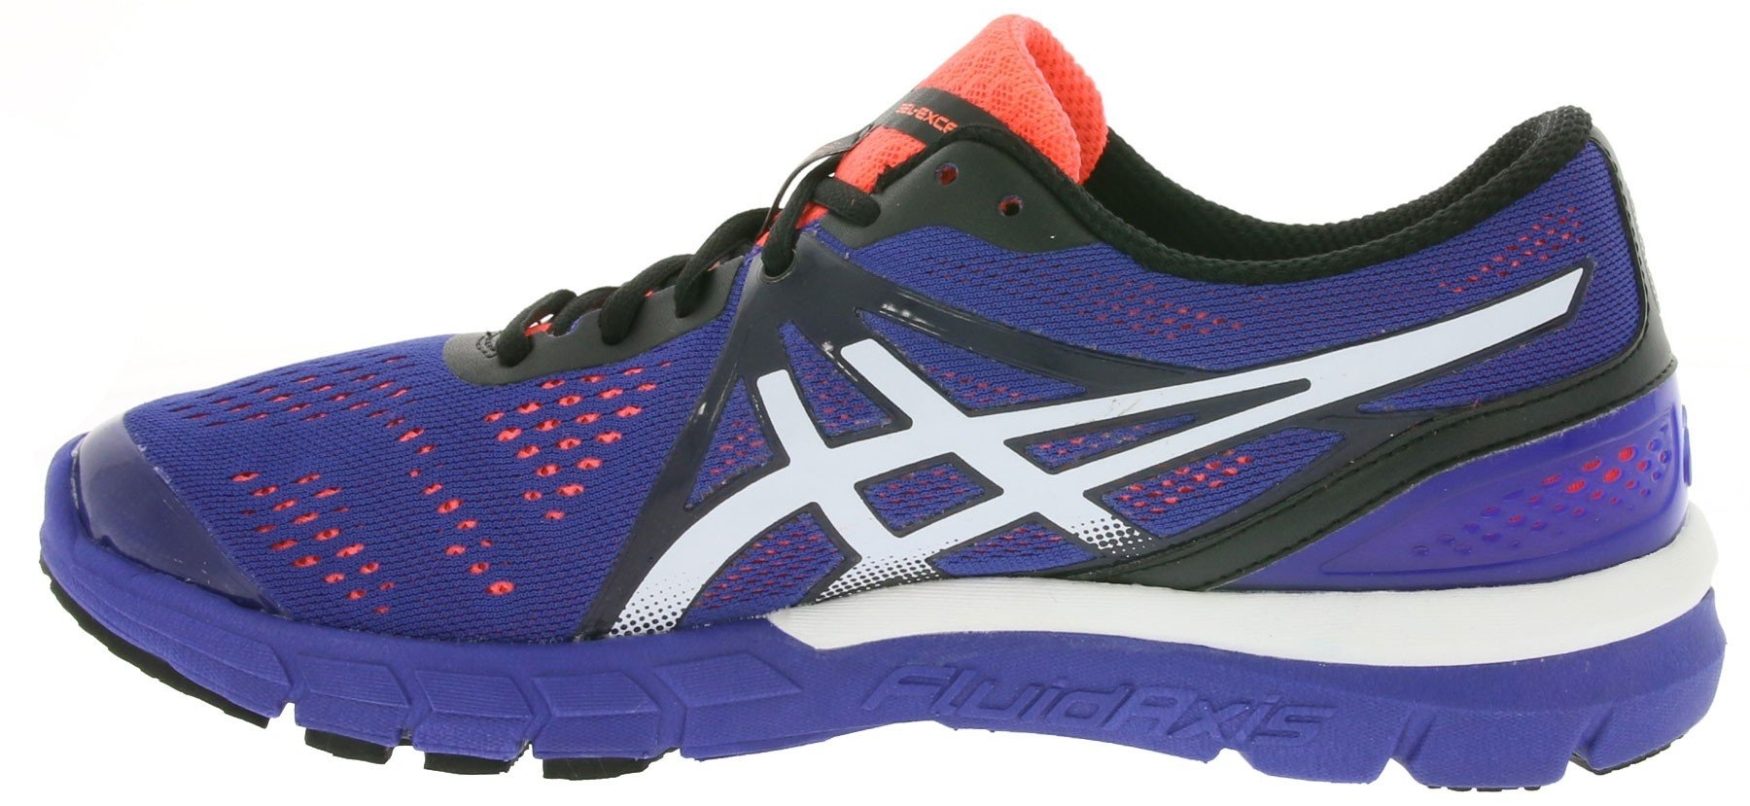 Only £70 + Review of Asics Gel Excel33 3 | RunRepeat